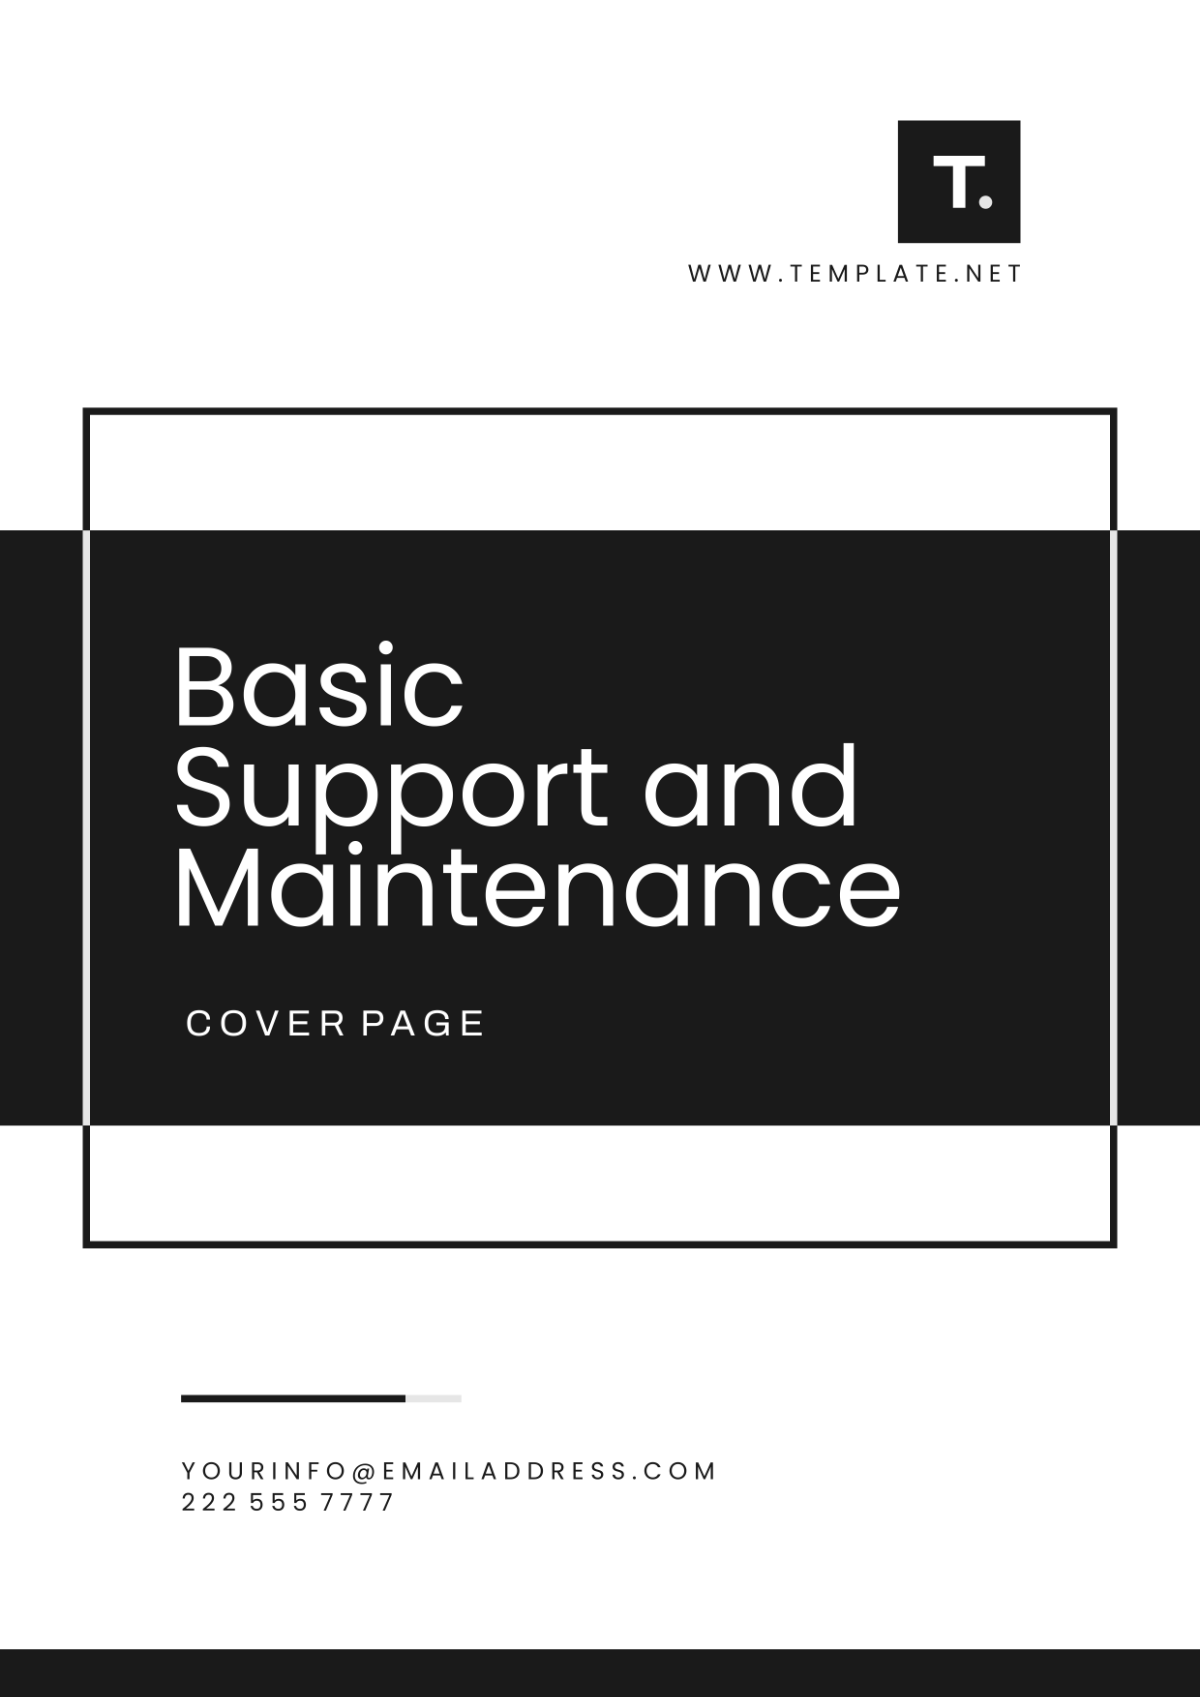 Basic Support and Maintenance Cover Page